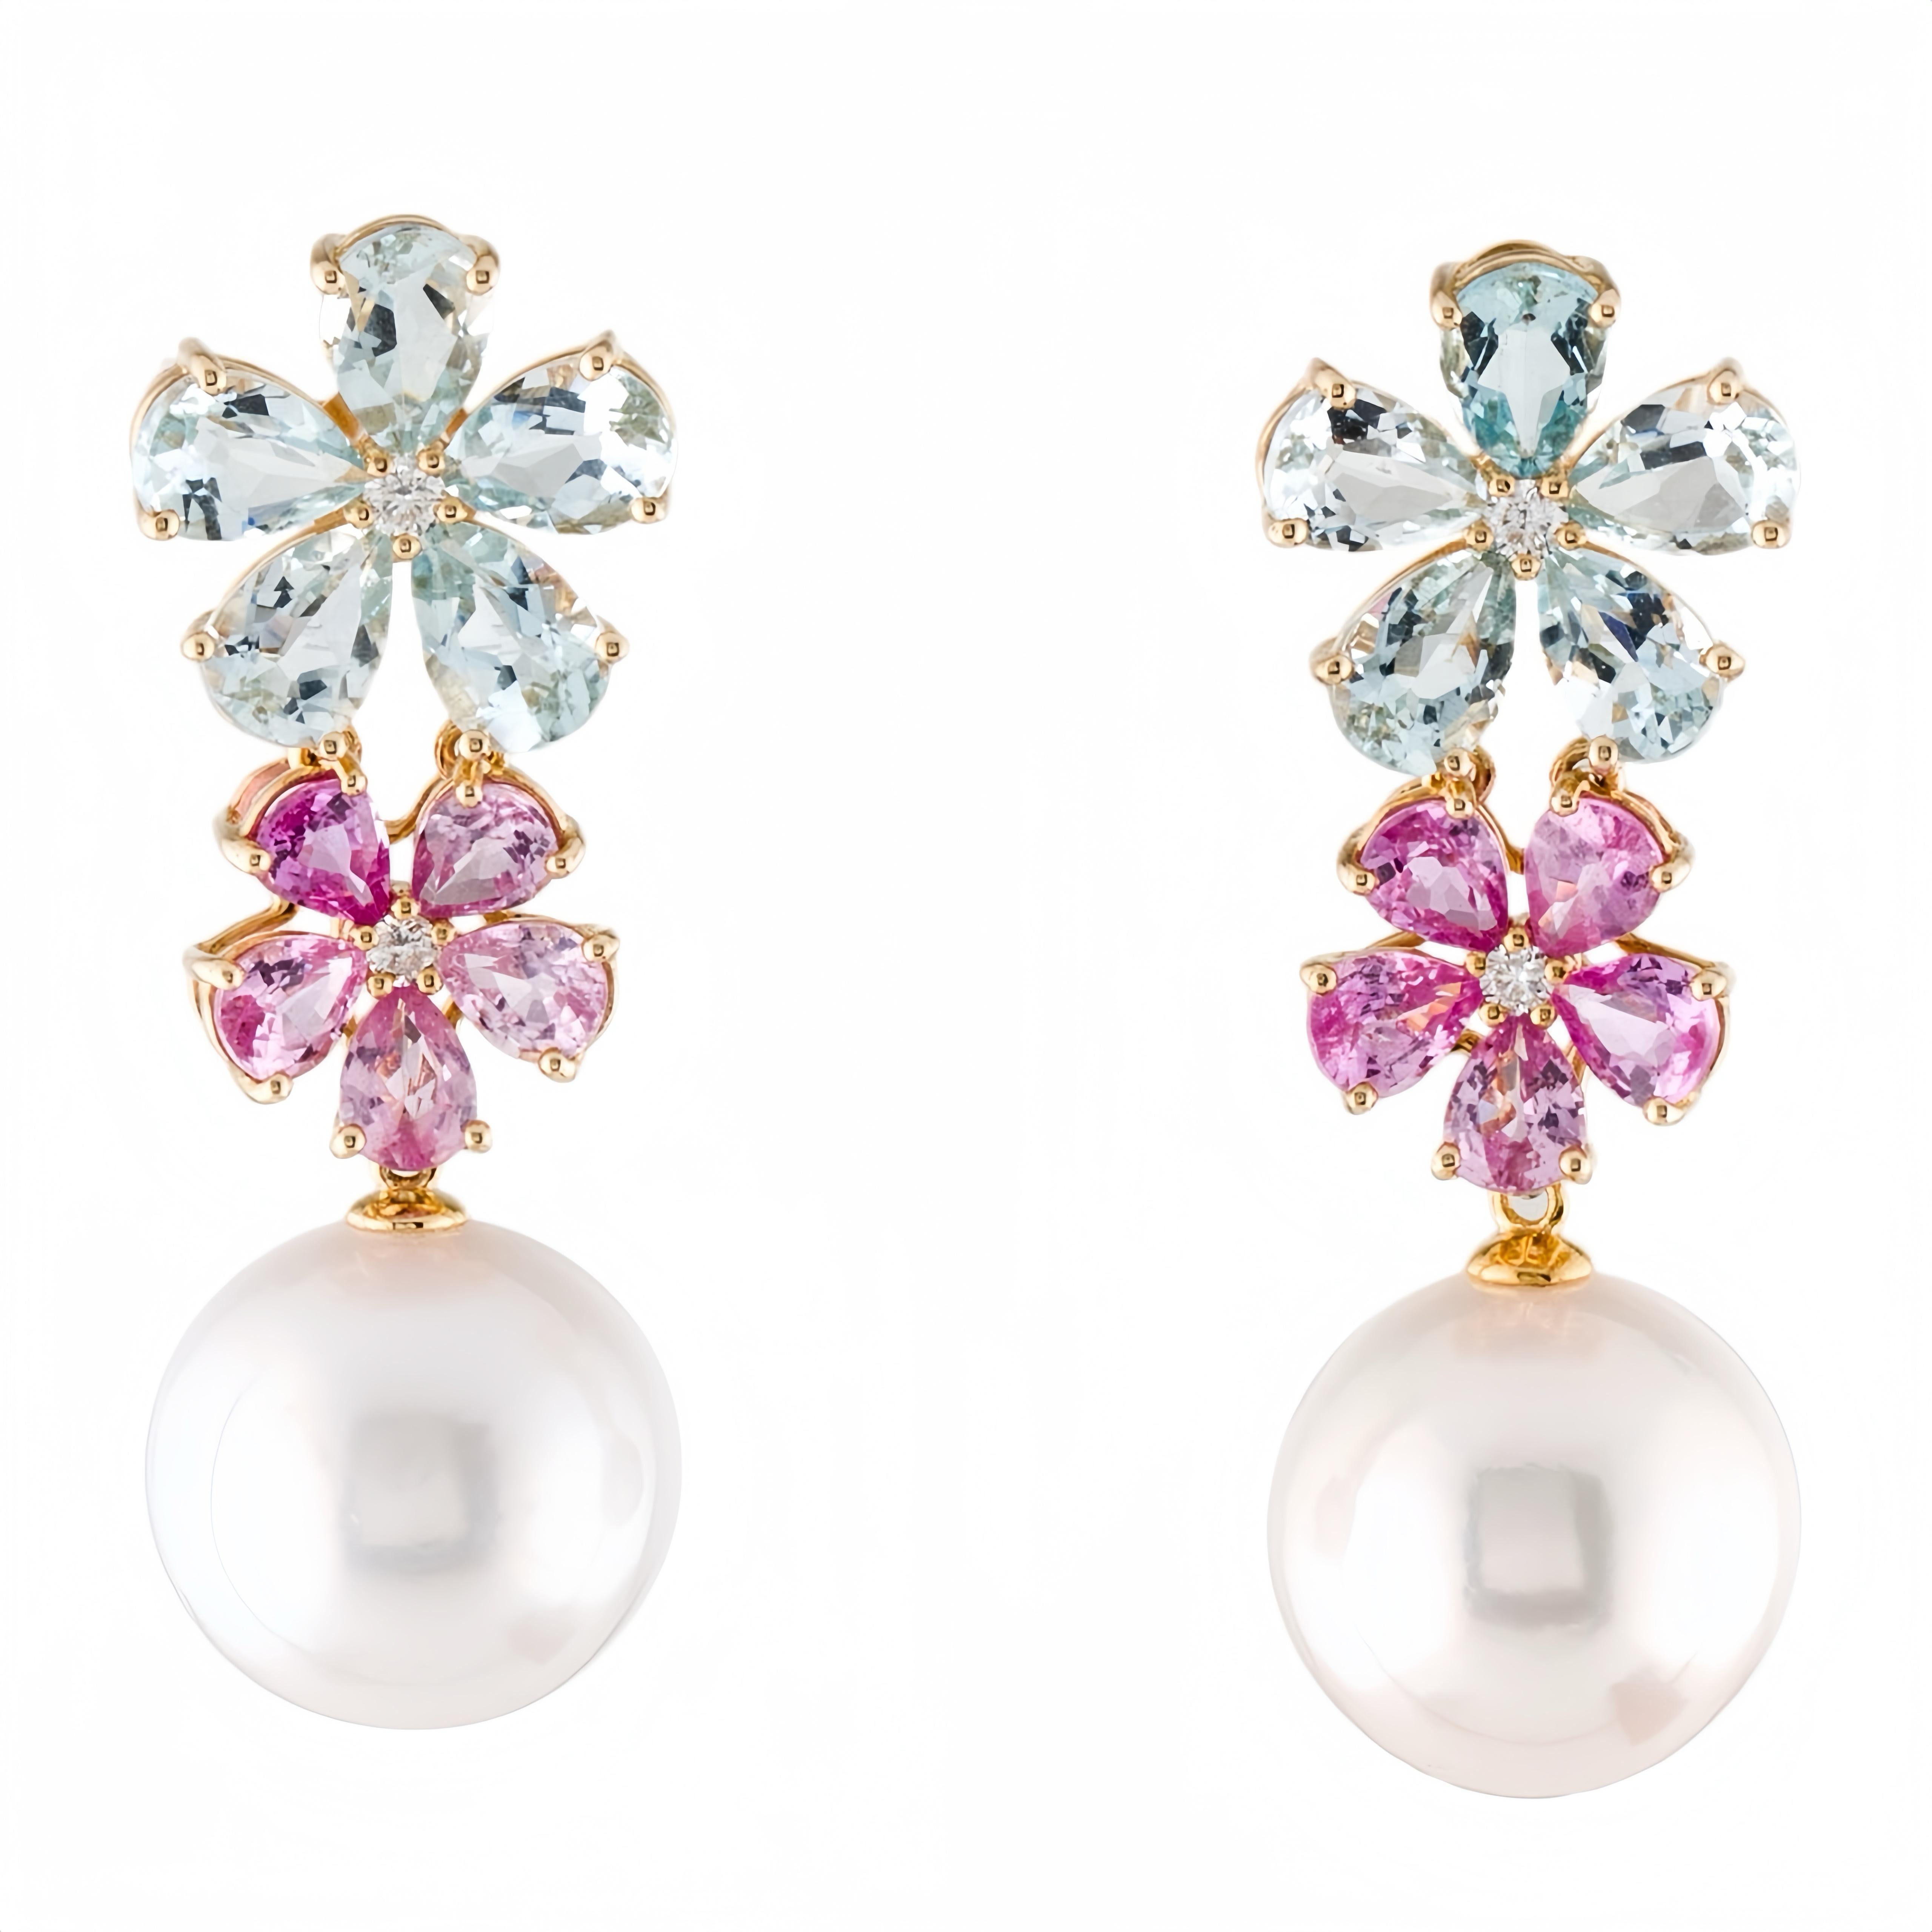 Discover Nina Zhou Aquamarine Pink Sapphire Diamond Blossom 12-13mm Pearl Convertible Drop Earrings in 18k Yellow Gold, representing timeless elegance and intricate craftsmanship. These exquisite earrings feature a stunning array of 12-13mm pearls,